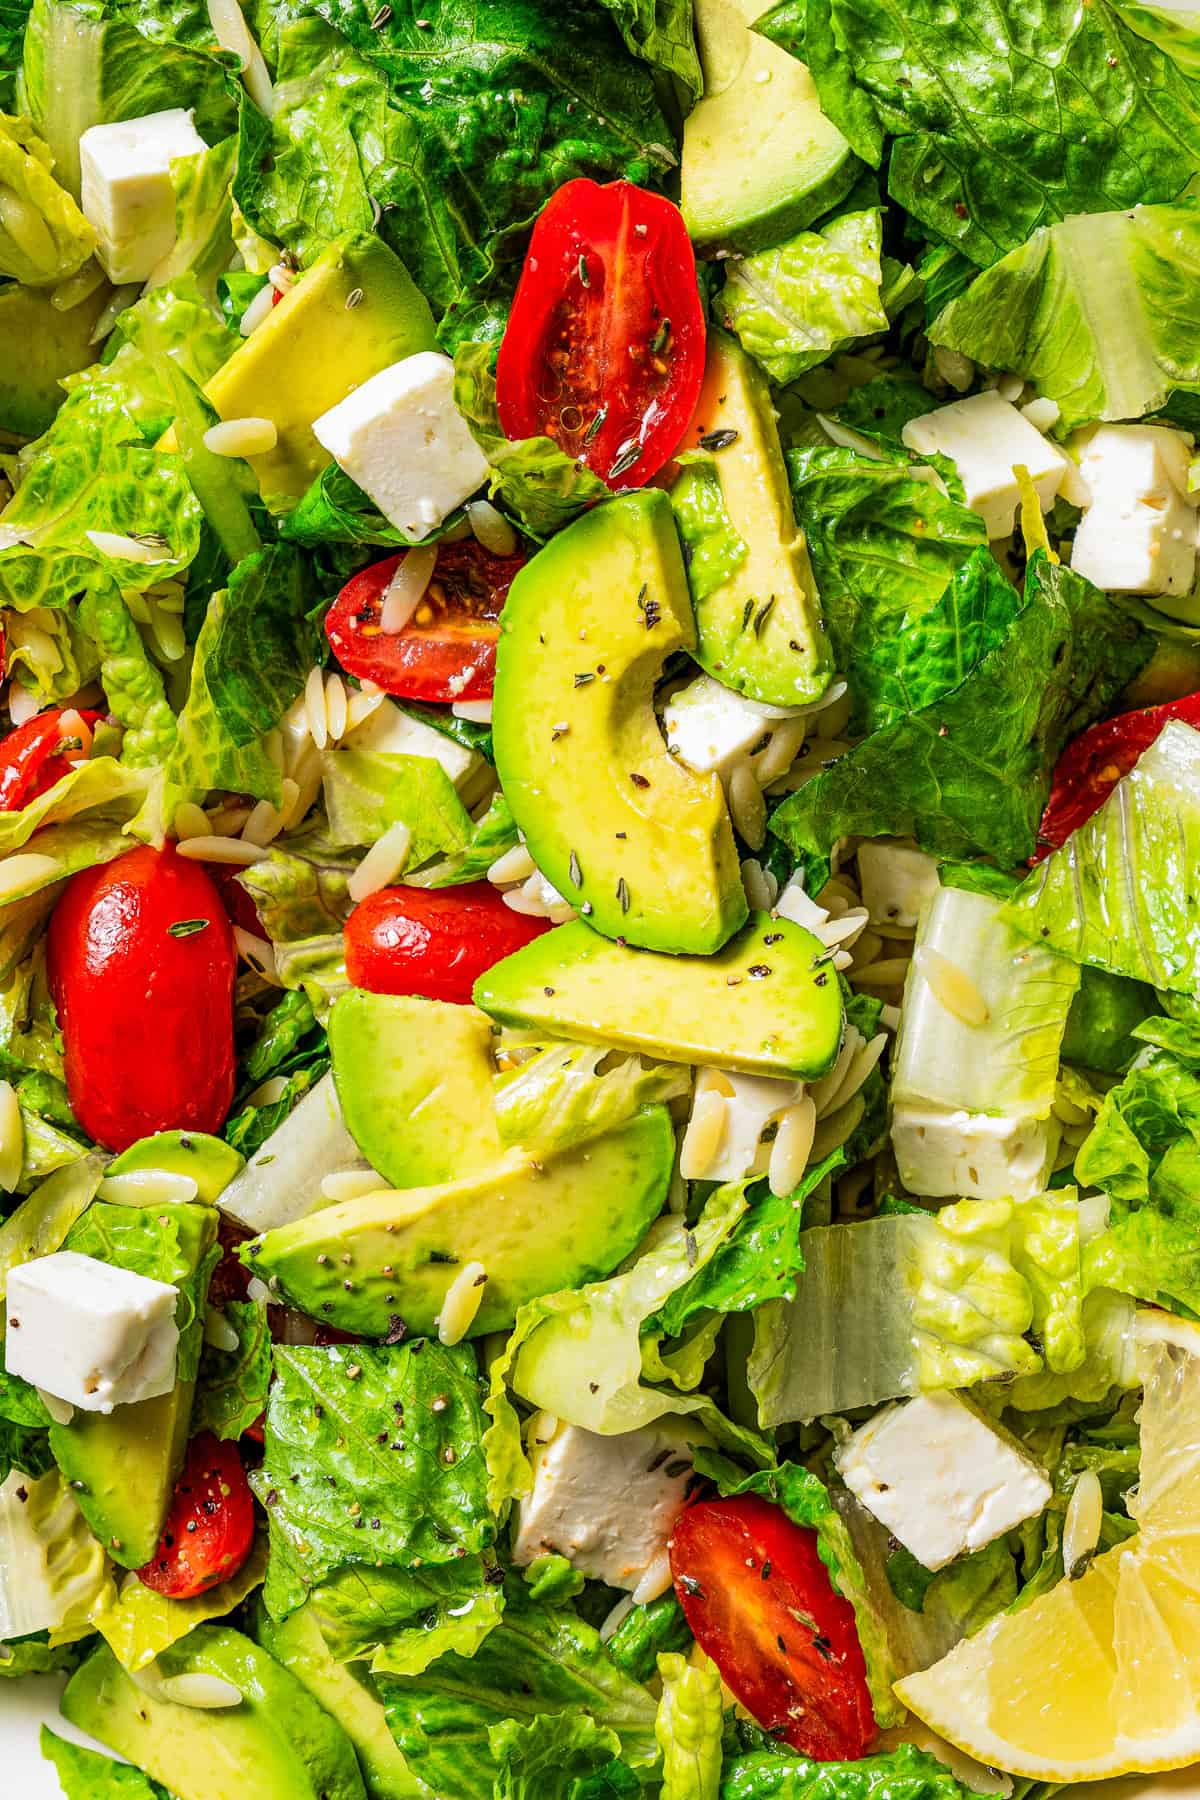 Close-up image of chopped salad greens, sliced cherry tomatoes, cubes of feta cheese, and slices of avocado.